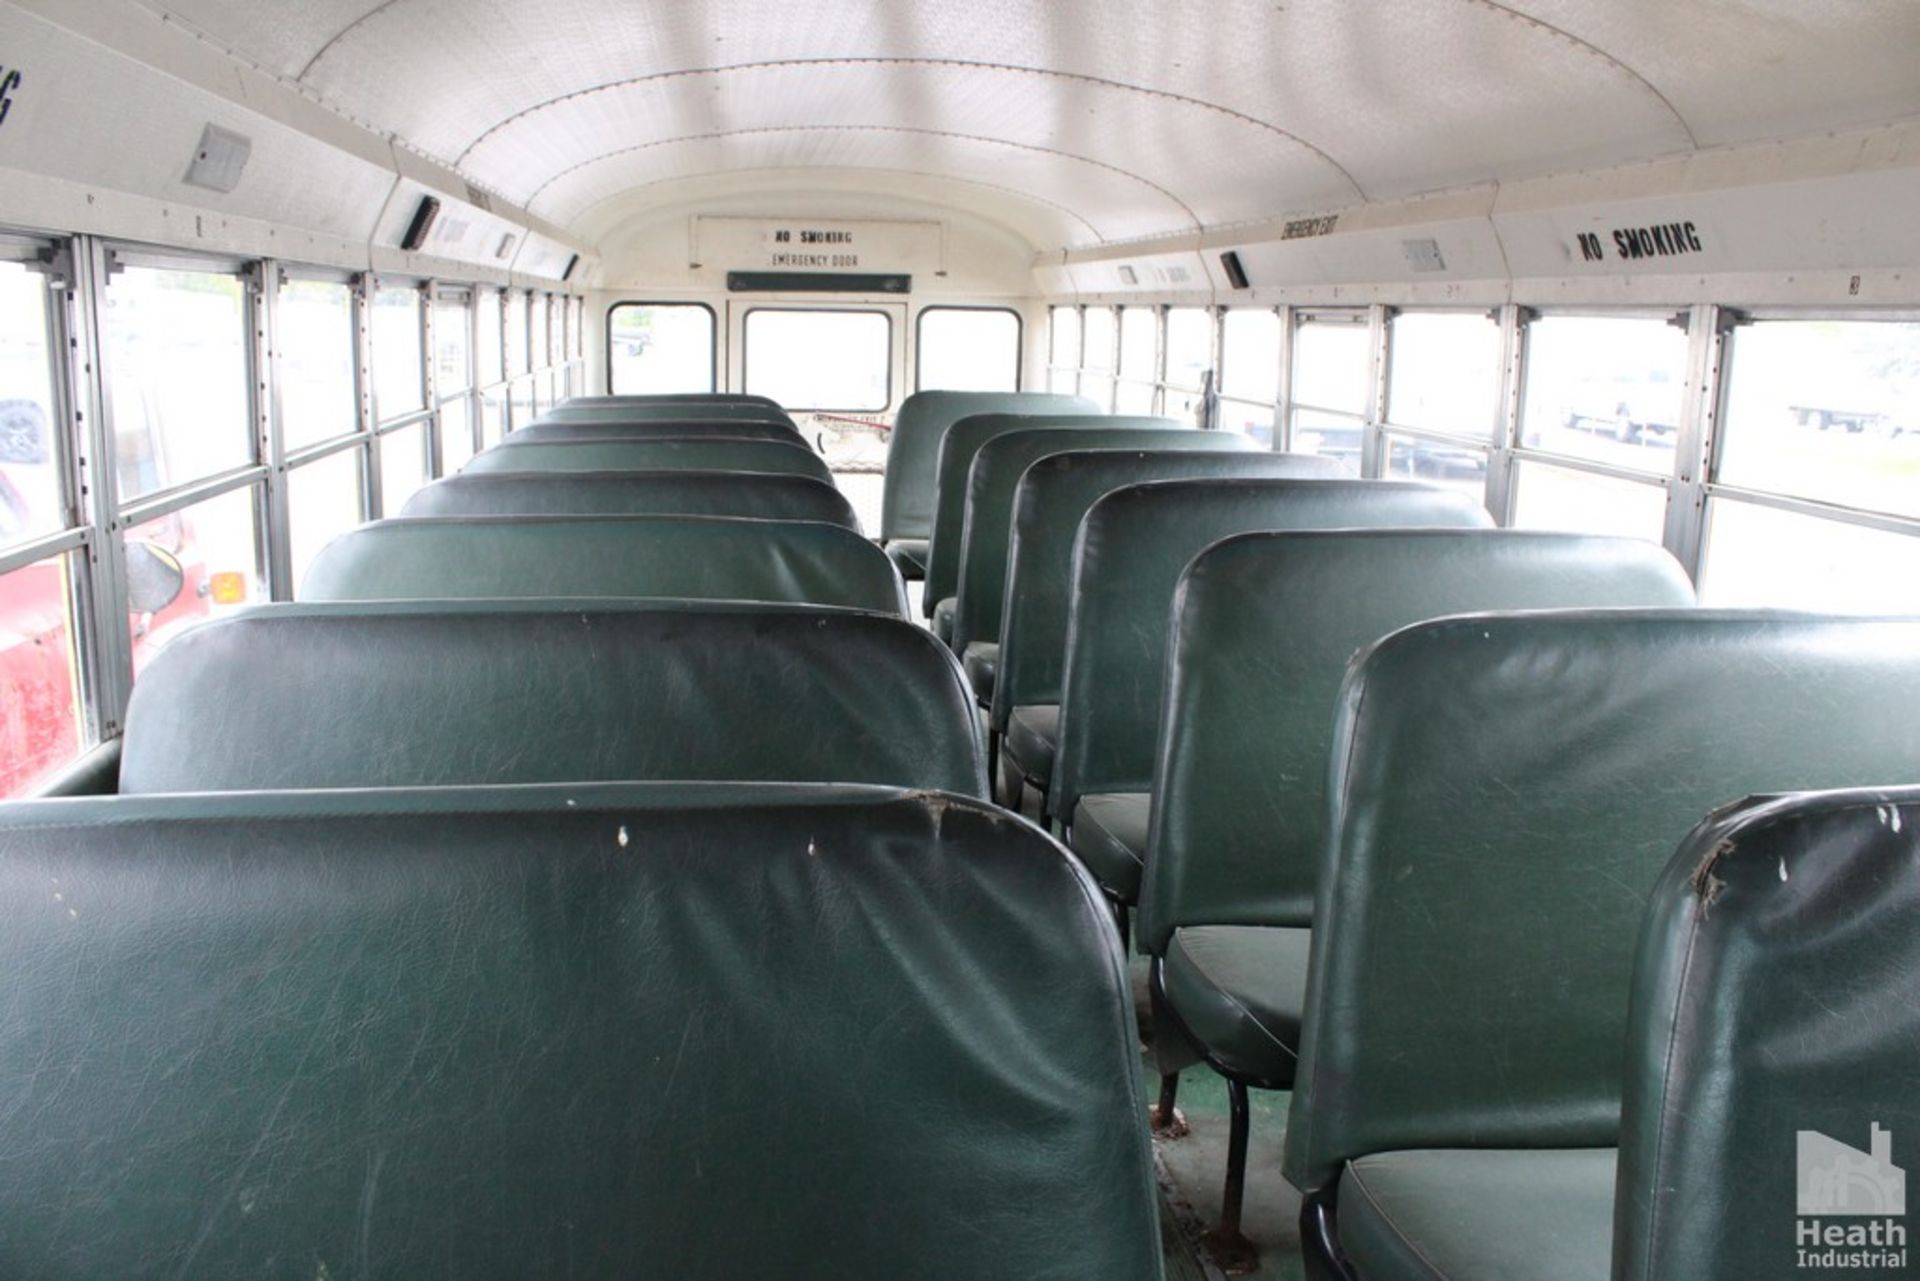 FORD B700 SERIES SCHOOL BUS | AMTRAN SS-29 BUS BODY | 8 ROW BENCH SEATING | GAS | VIN - Image 6 of 8